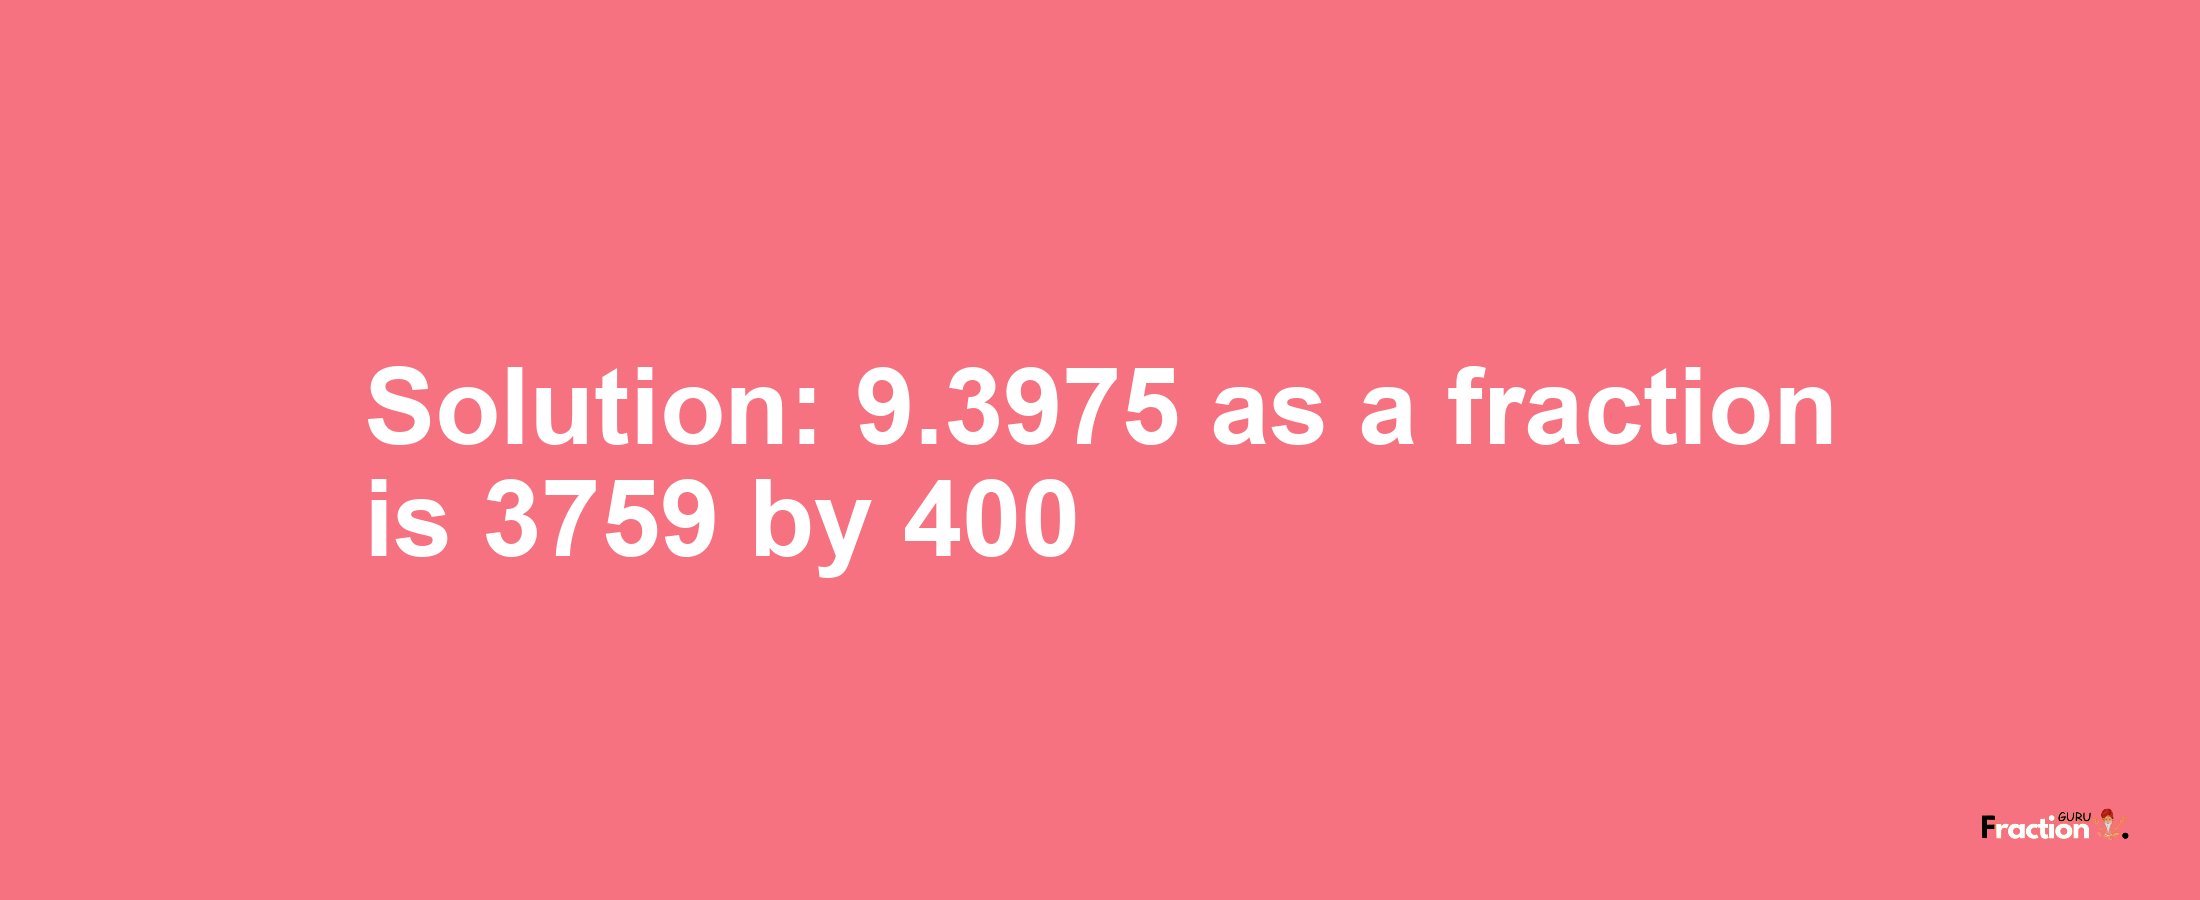 Solution:9.3975 as a fraction is 3759/400